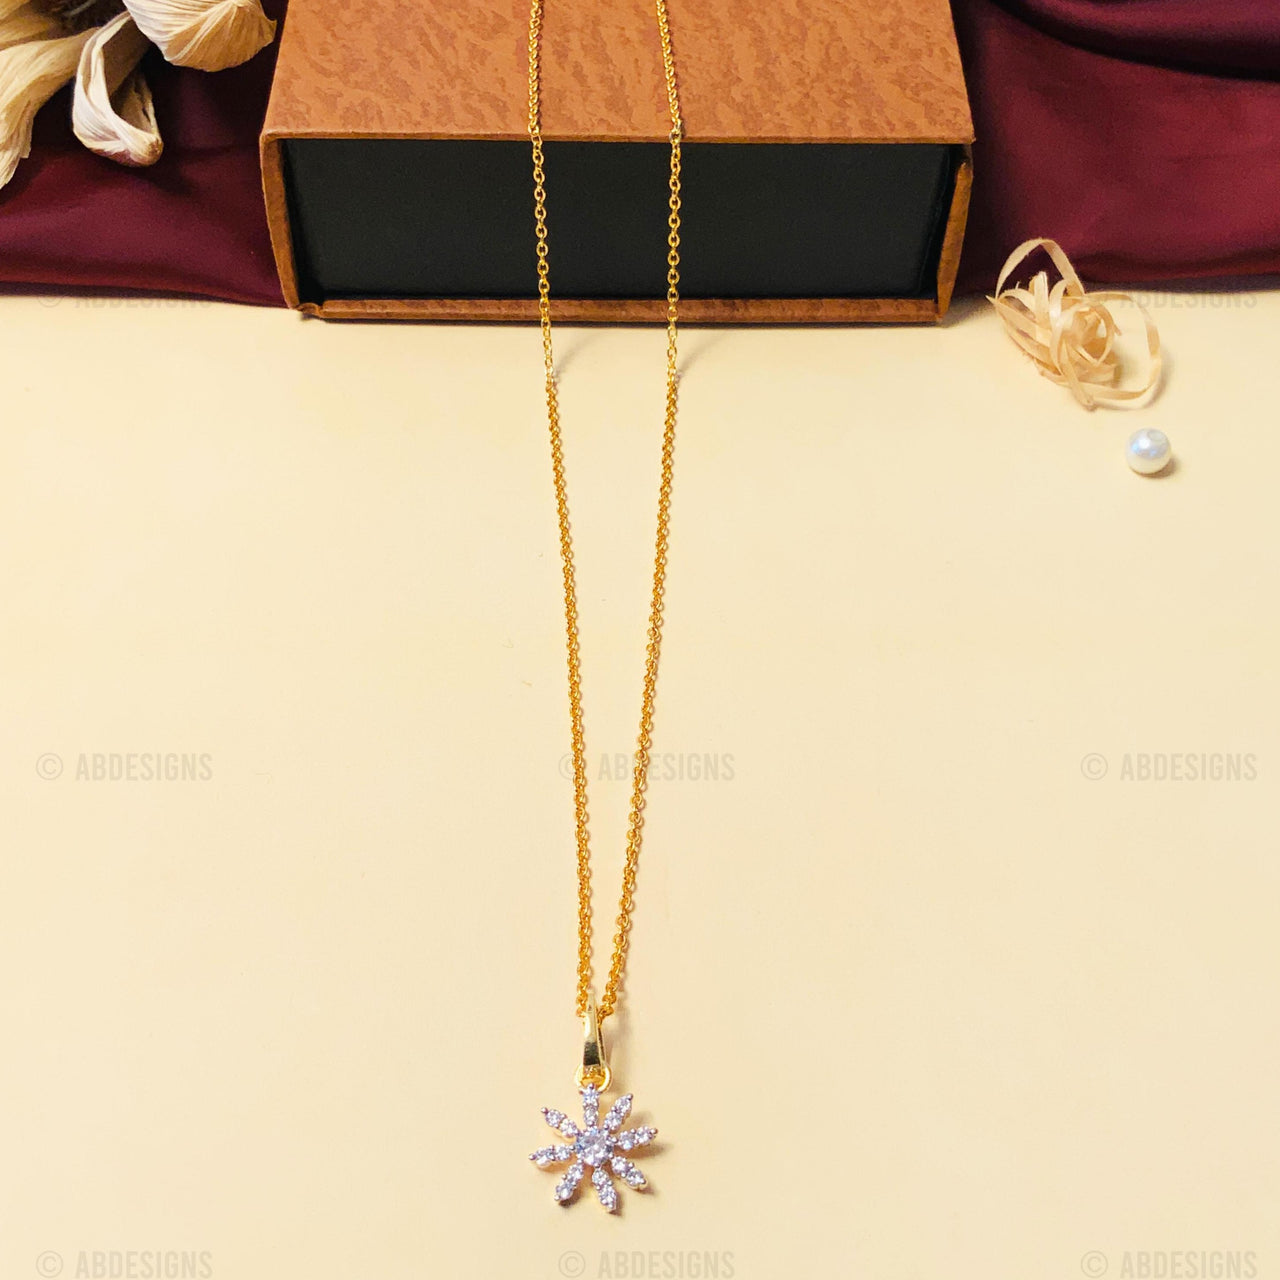 Mesmerizing High-Quality Gold Plated Pendant Chain